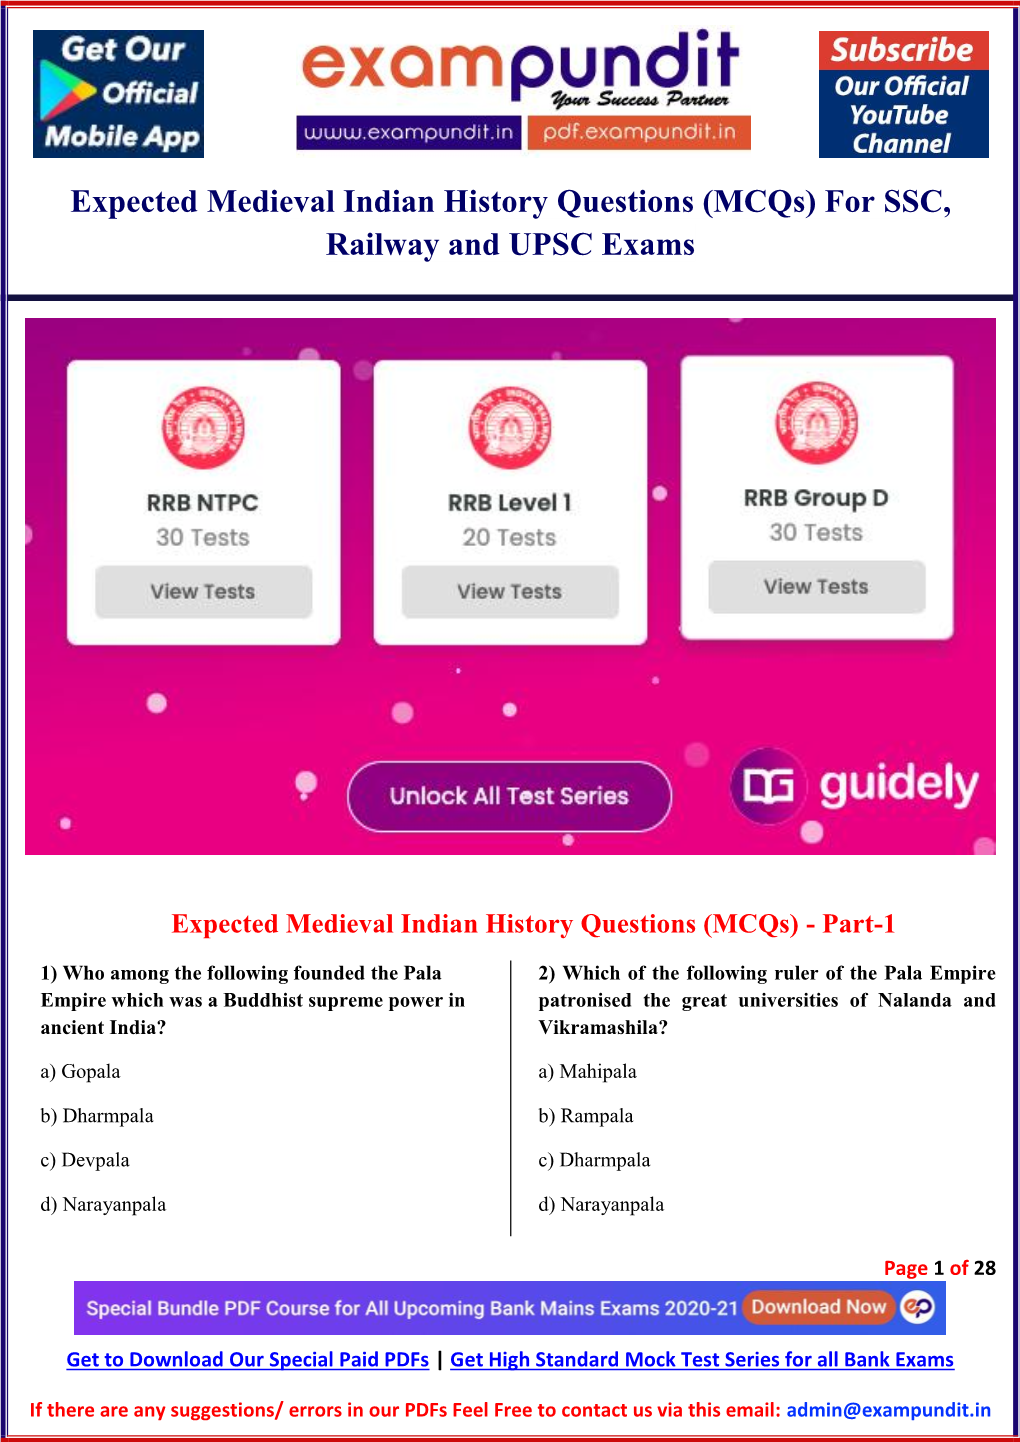 Expected Medieval Indian History Questions (Mcqs) for SSC, Railway and UPSC Exams